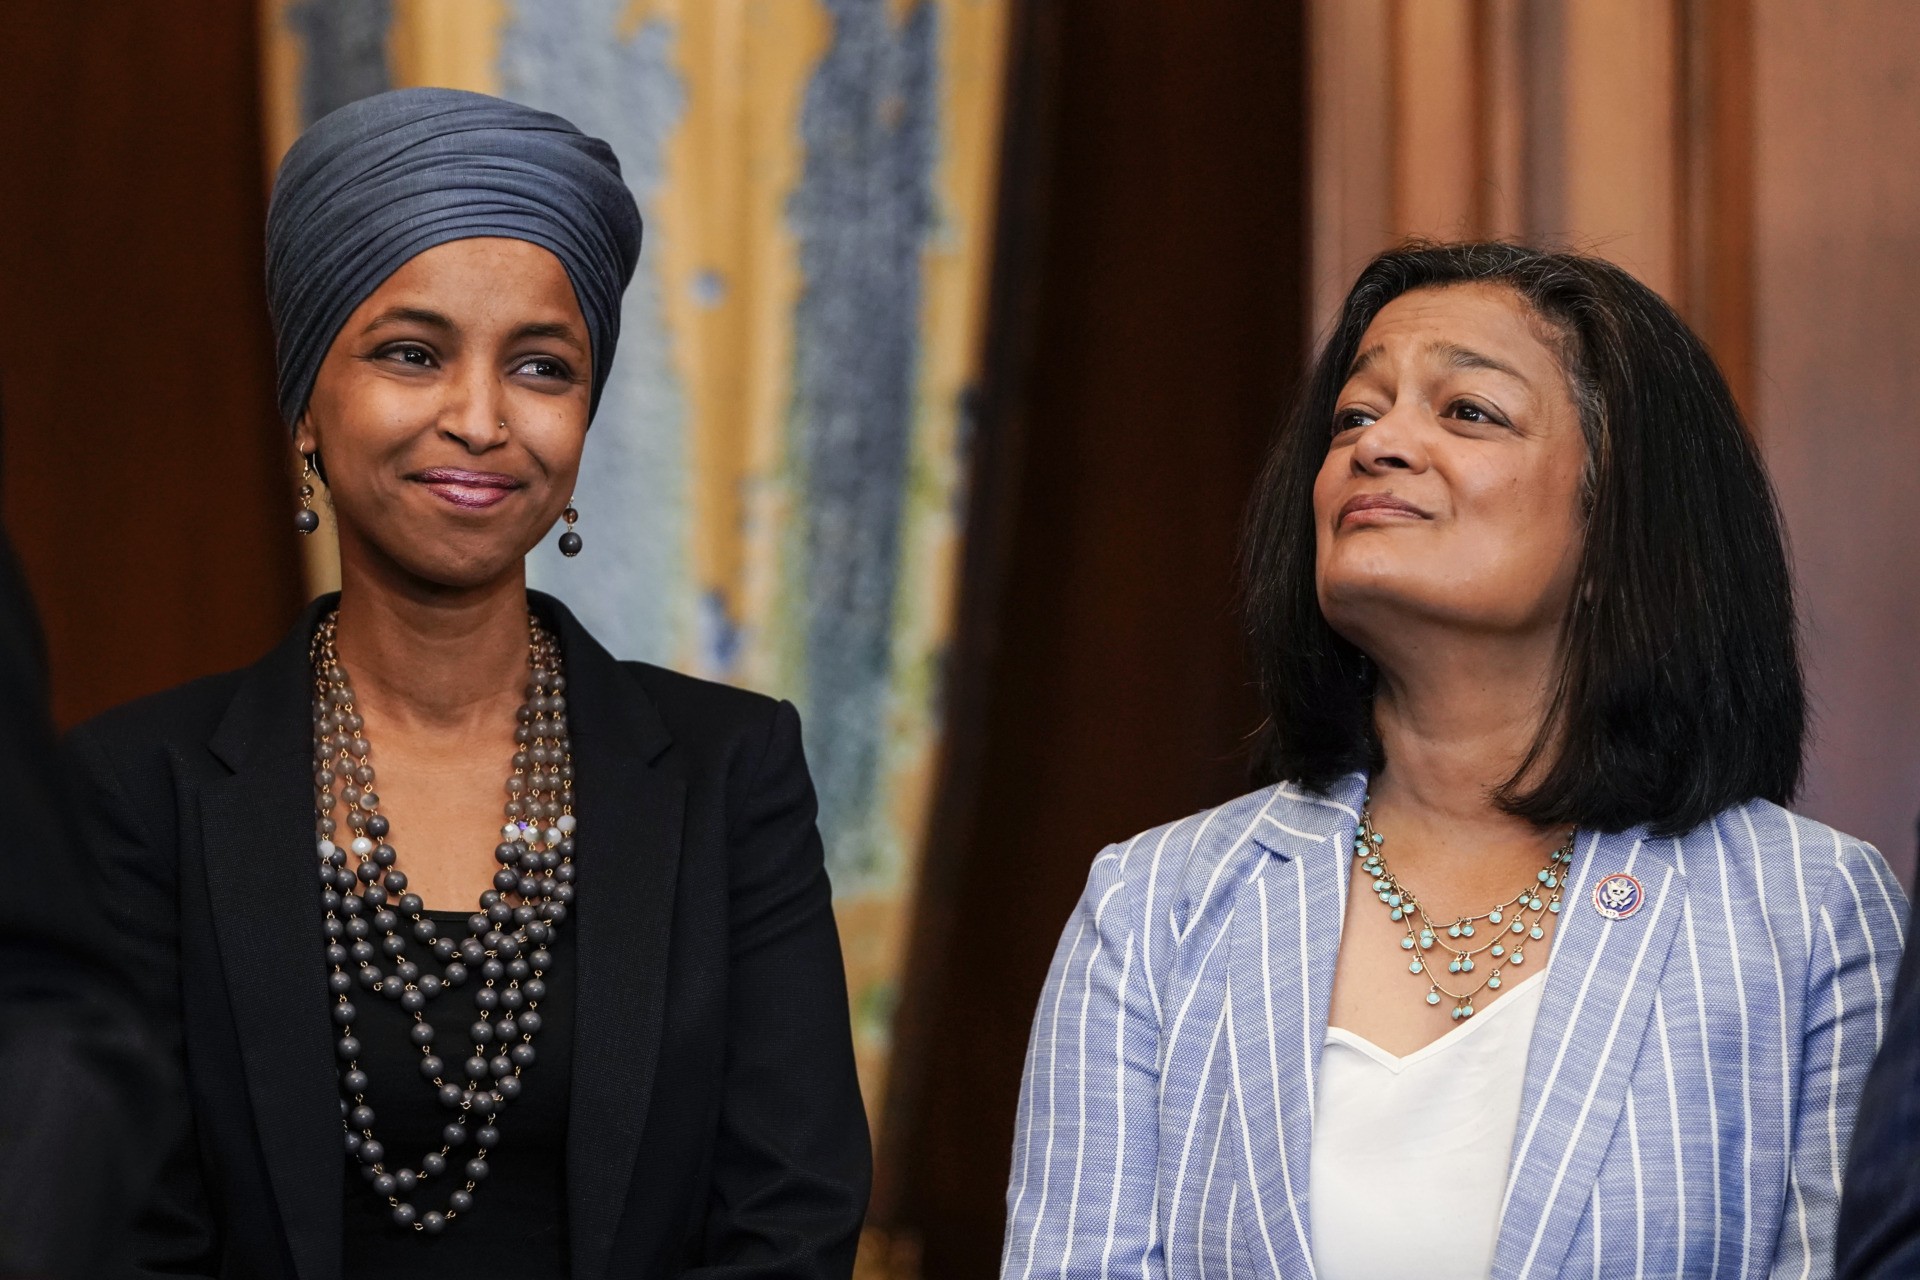 WASHINGTON, DC - JUNE 17: Reps. Ilhan Omar (D-MI) and Pramila Jayapal (D-WA) listen as Speaker of the House Nancy Pelosi (D-CA) holds a bill enrollment signing ceremony for the Juneteenth National Independence Day Act on June 17, 2021 on Capitol Hill in Washington, DC. Juneteenth, celebrated on June 19th, commemorates the of the end of slavery in the United States and will be celebrated as a national holiday. (Photo by Joshua Roberts/Getty Images)